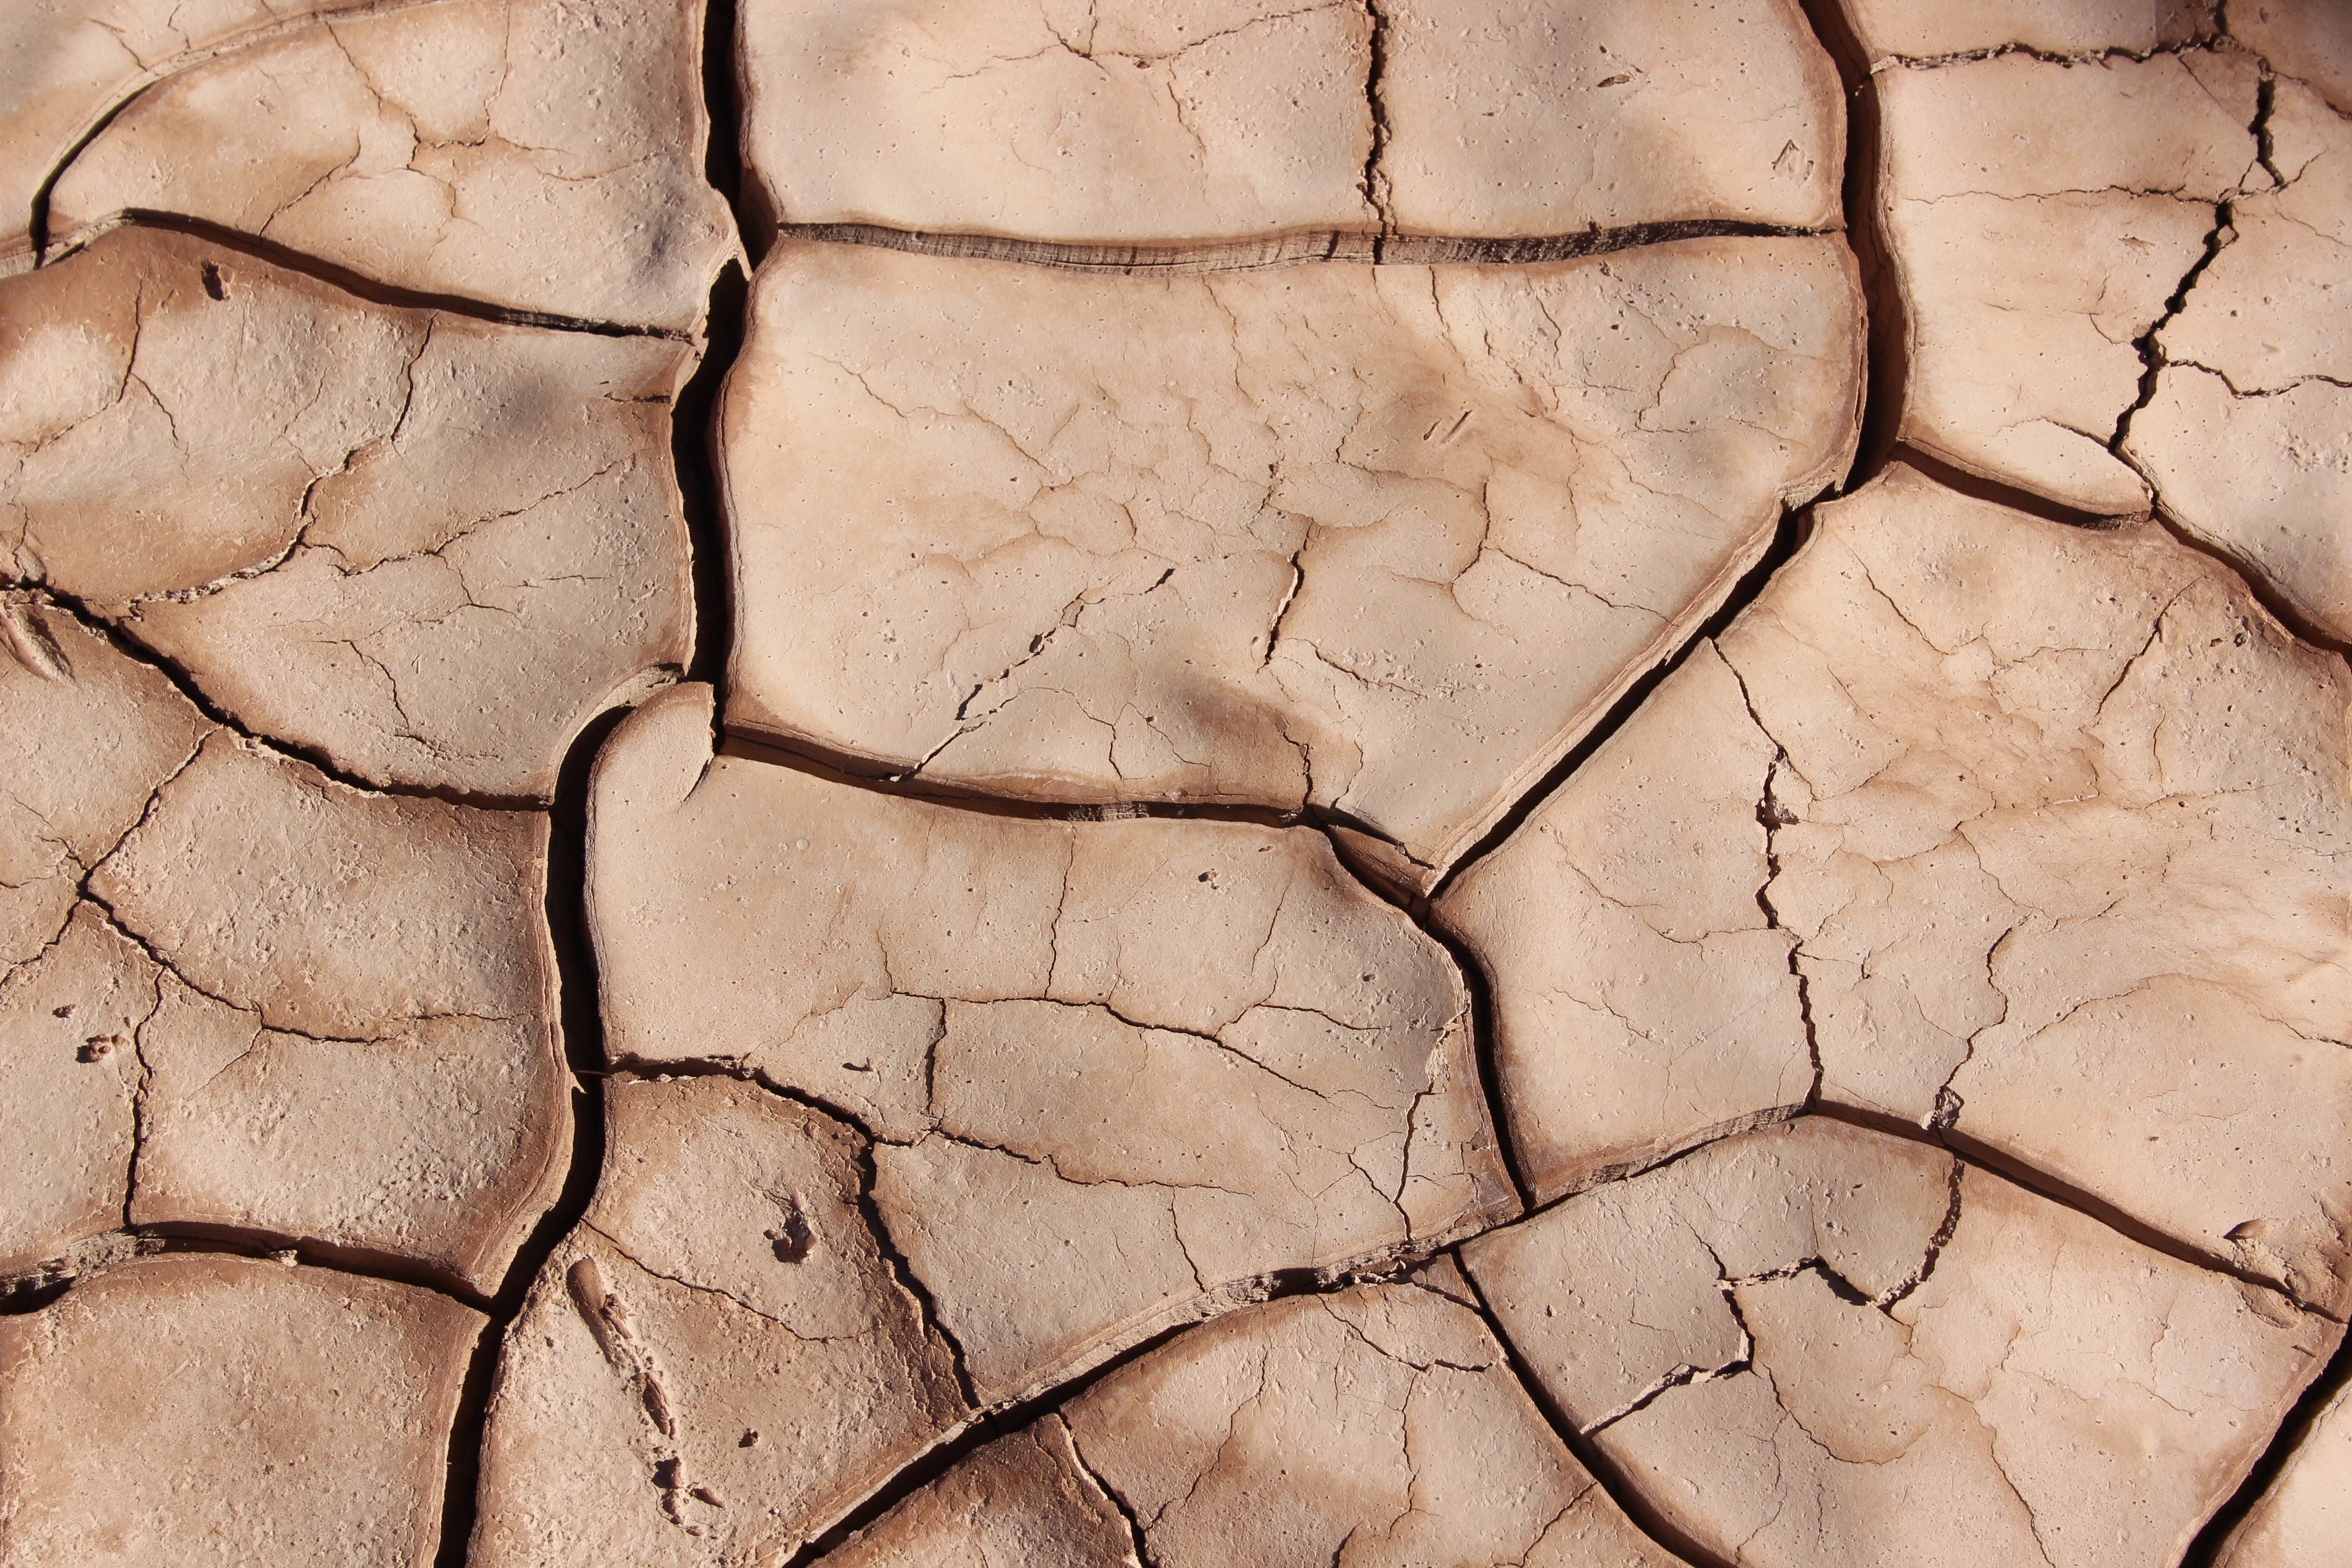 A dry desert used as a metaphor for the need of skincare for dry dehydrated skin.